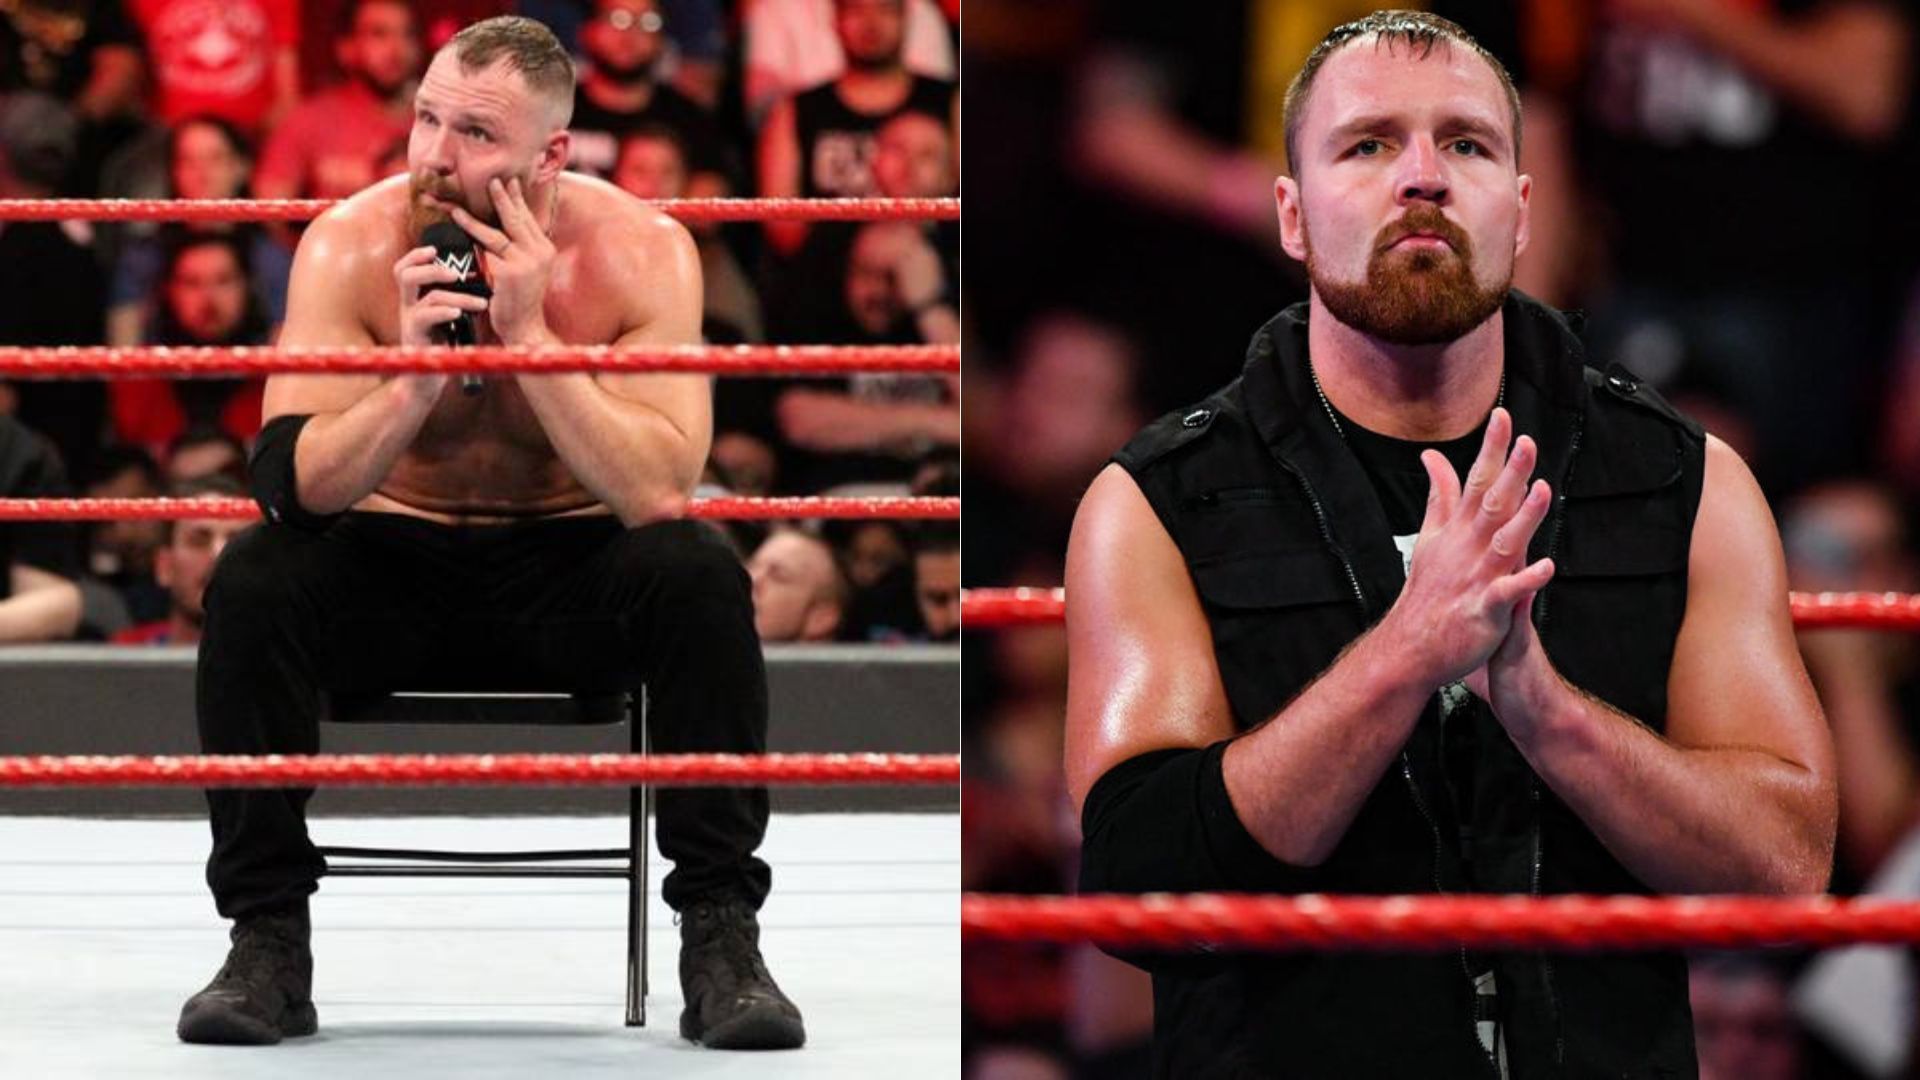 Jon Moxley, formerly known as Dean Ambrose in WWE.